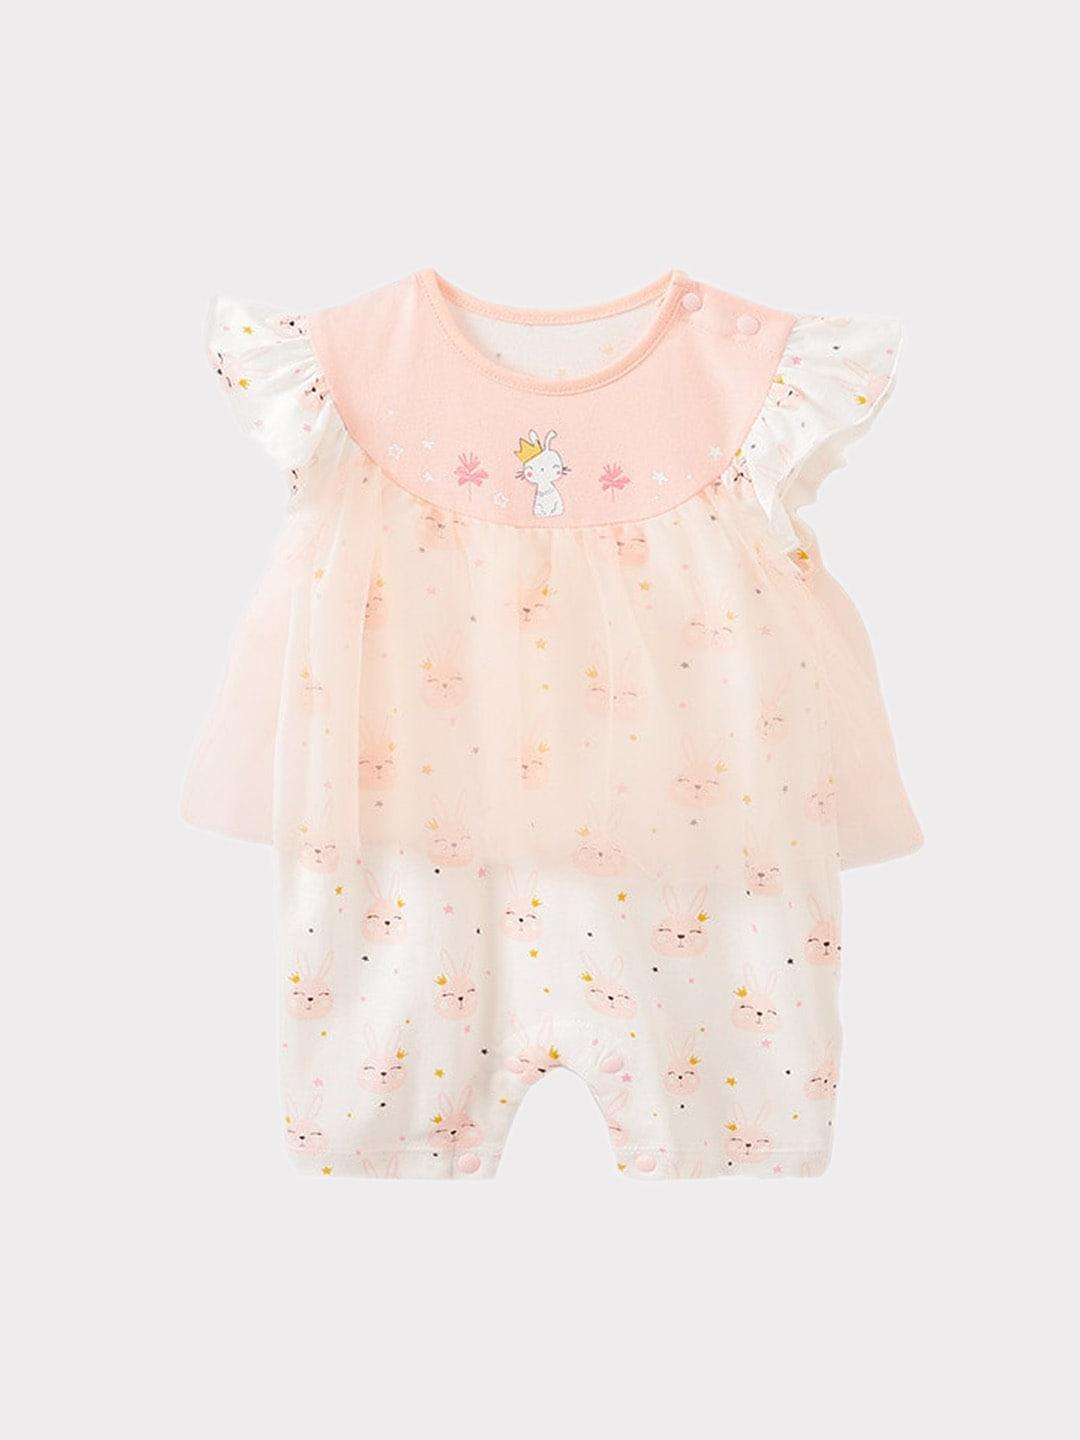 stylecast infant girls peach conversatinal printed cotton rompers